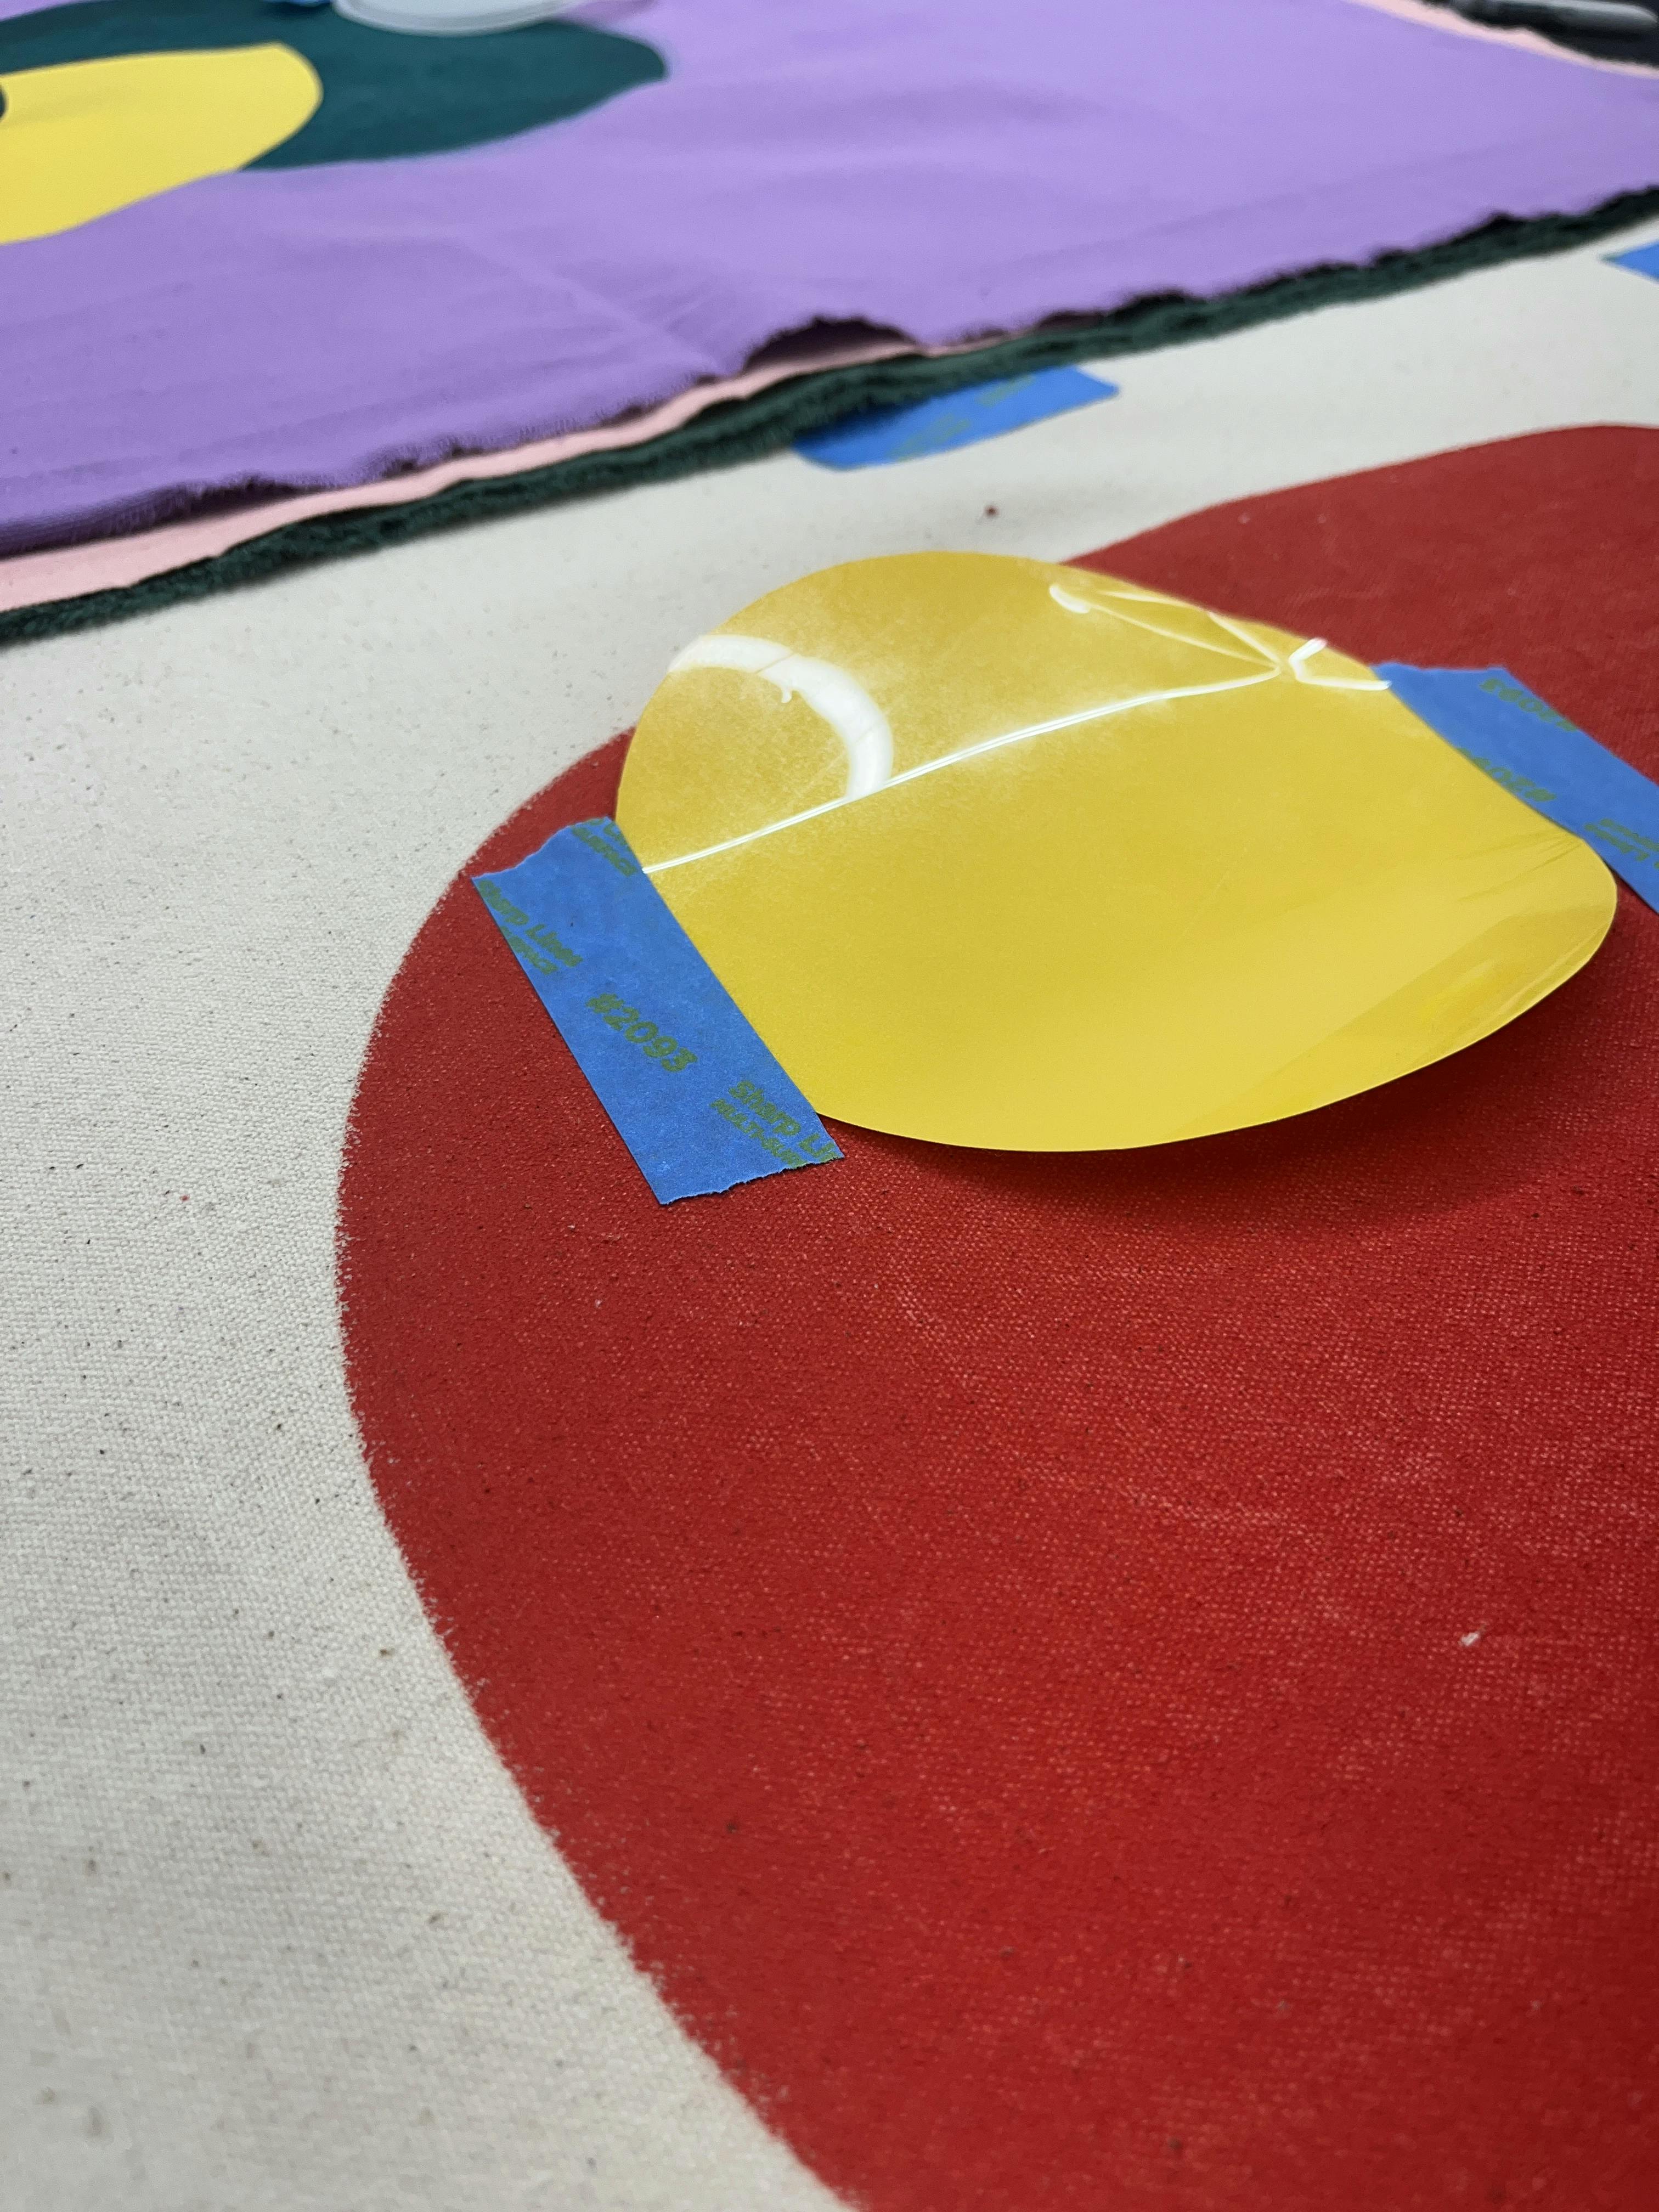 An in-progress work by artist Chad Kouri of a yellow circle taped to red fabric.